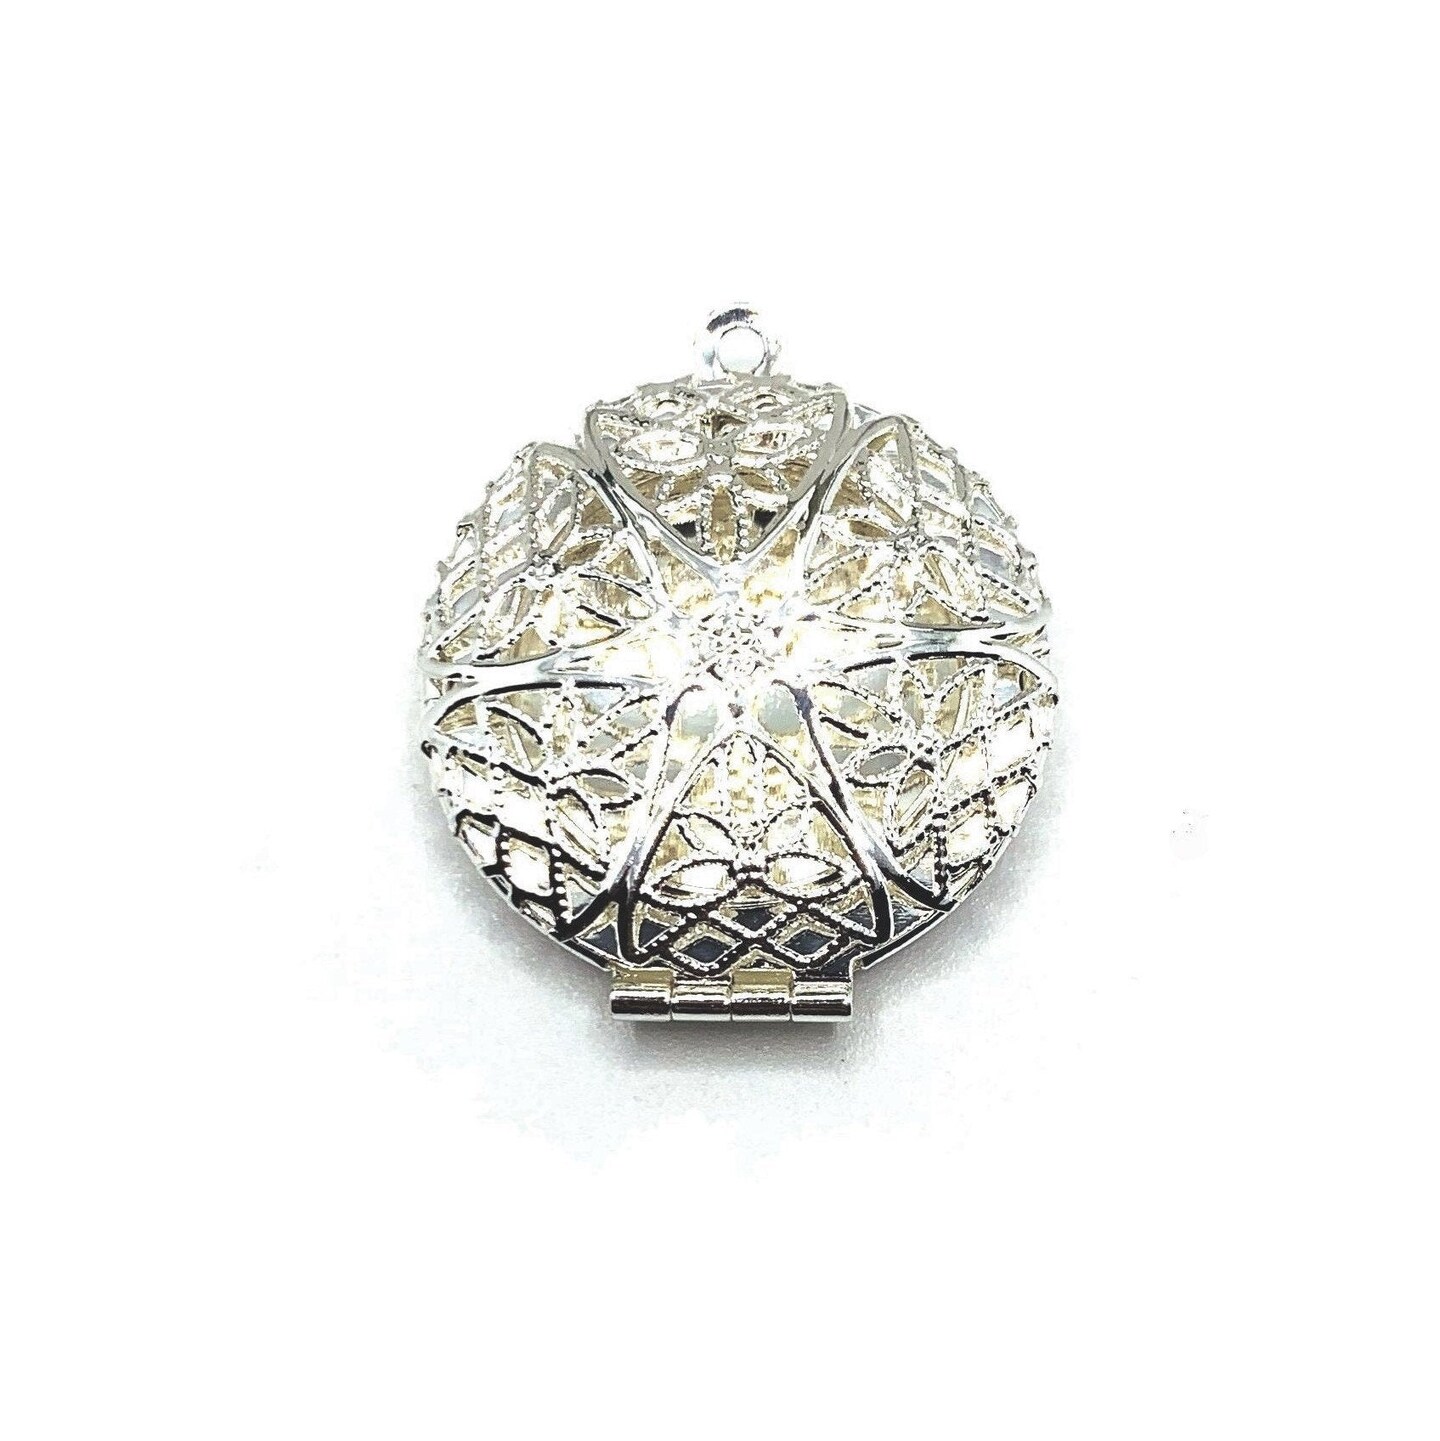 4, 20 or 50 Pieces: Bright Silver Filigree Aromatherapy Essential Oil Diffuser Lockets